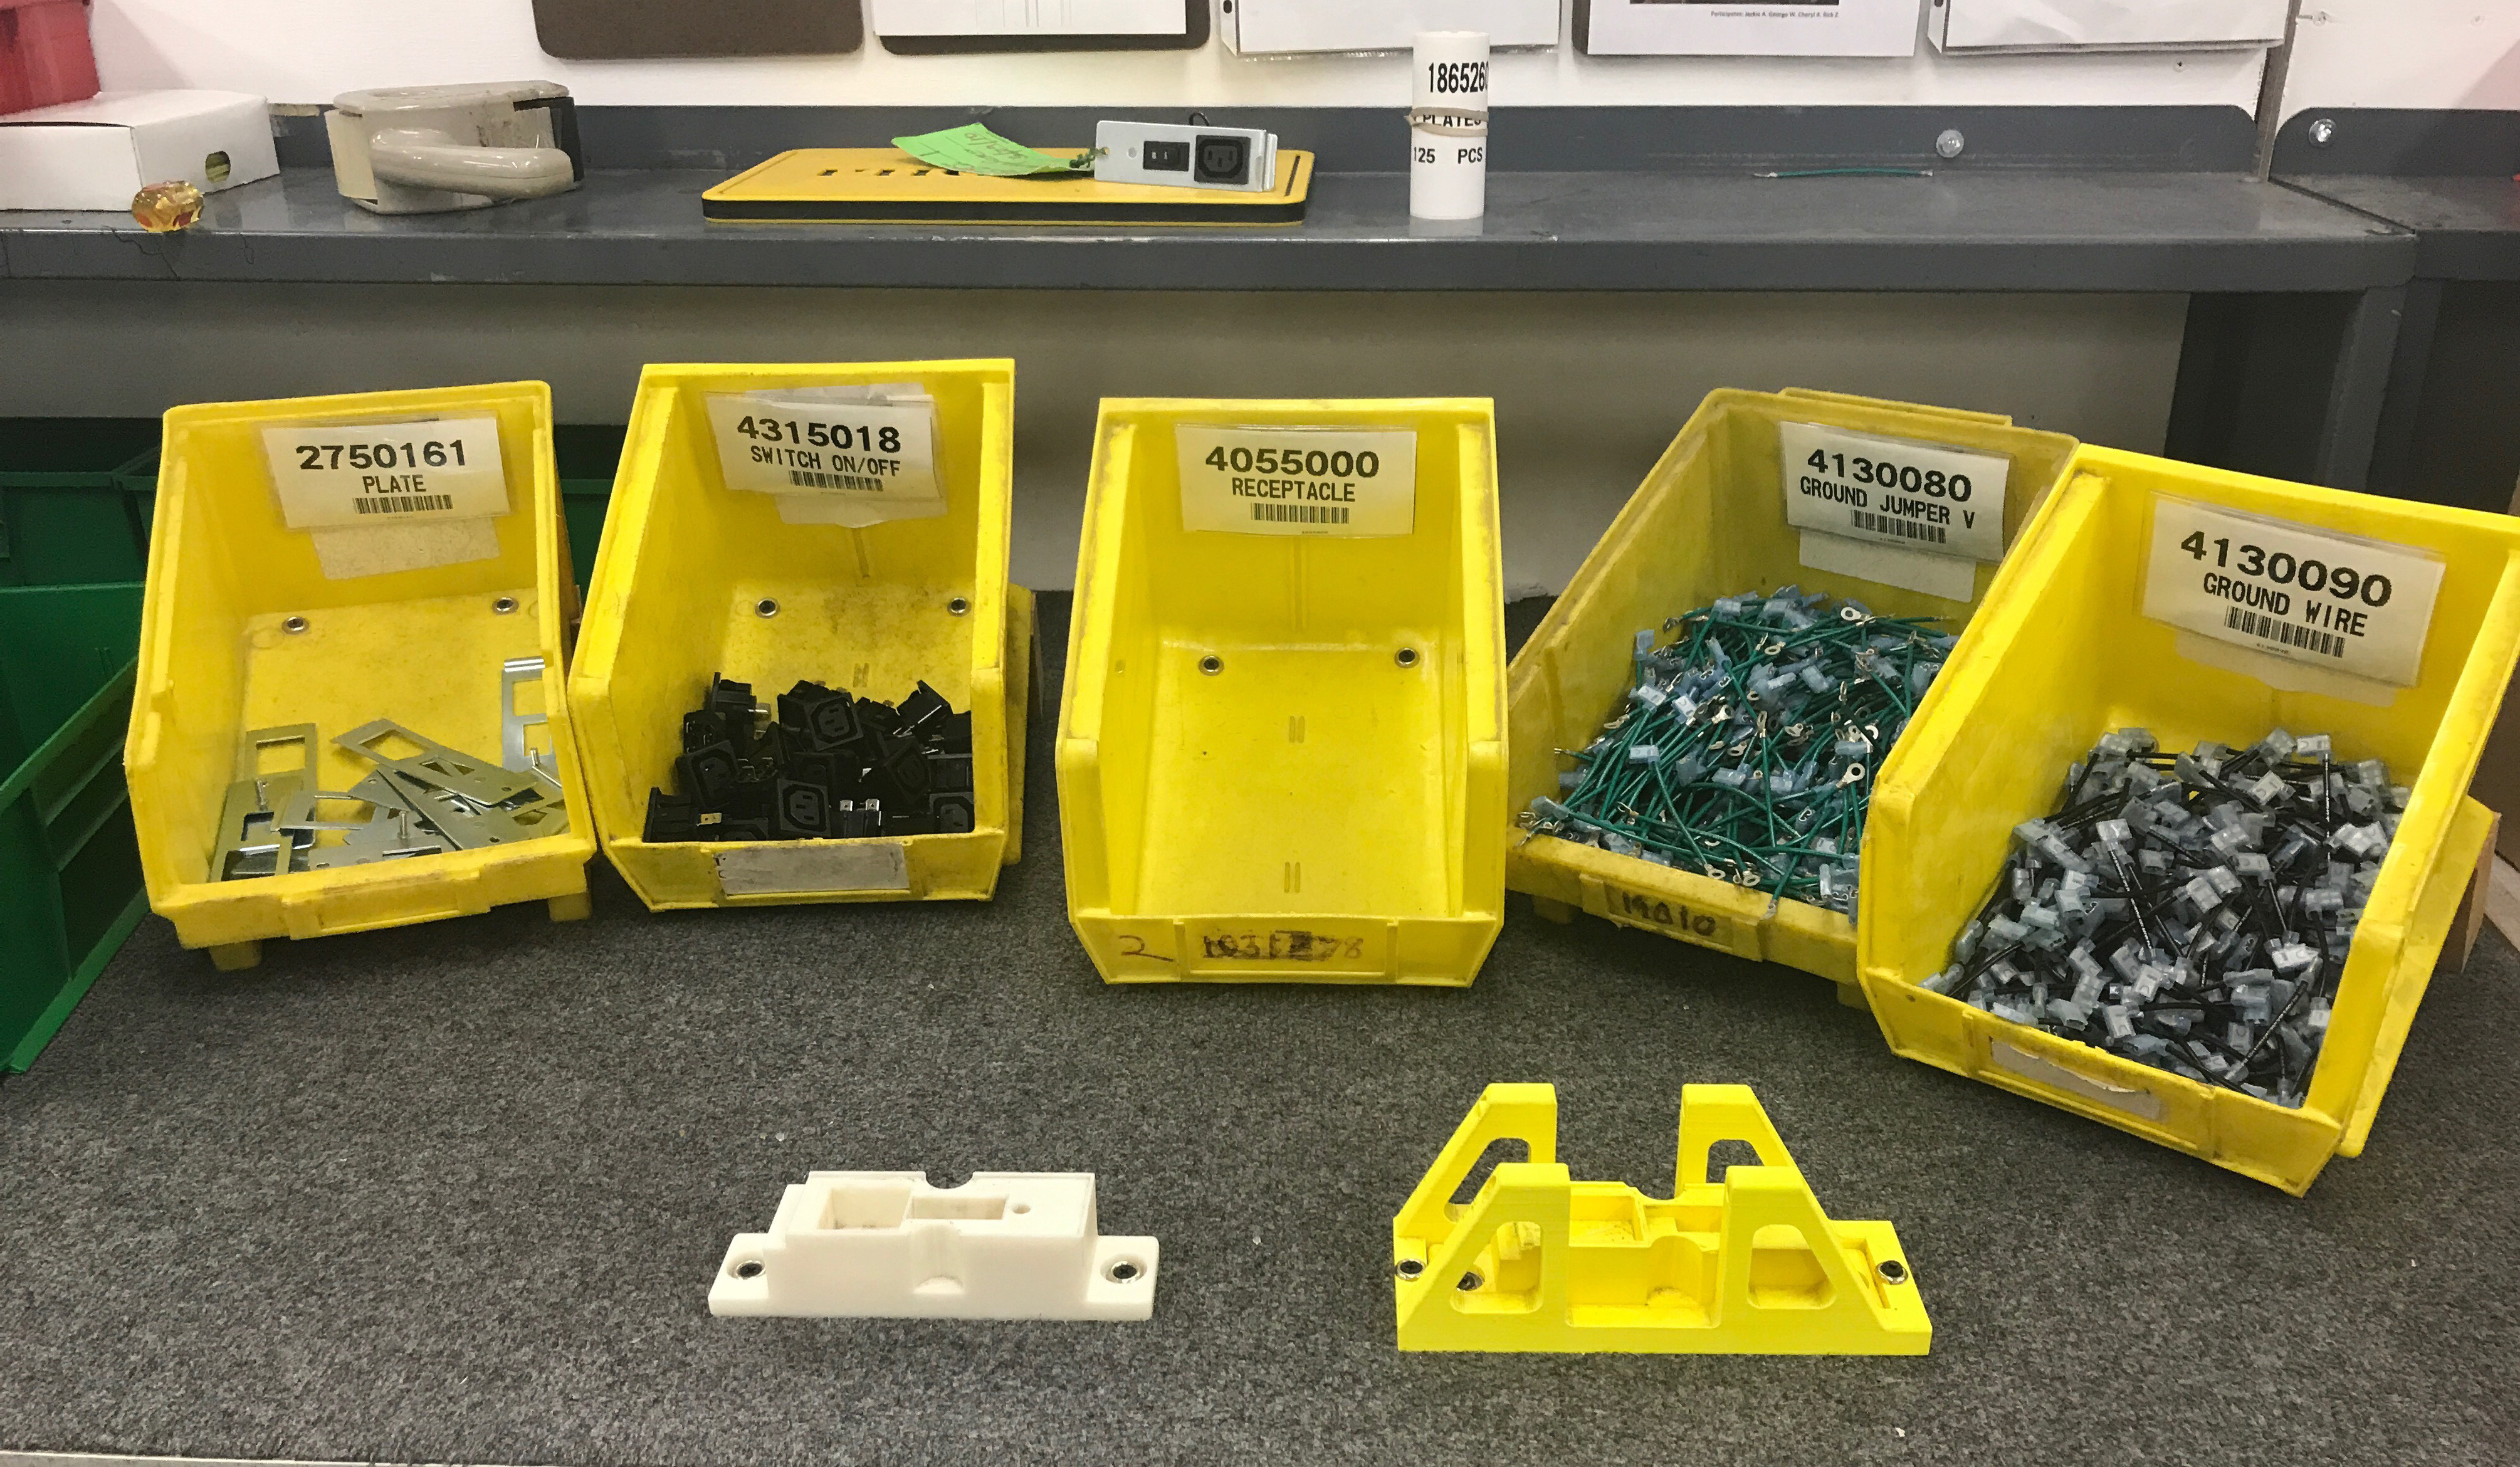 A work station has a series of five yellow bins, each containing different parts. In front of them are two small plastic jigs. 